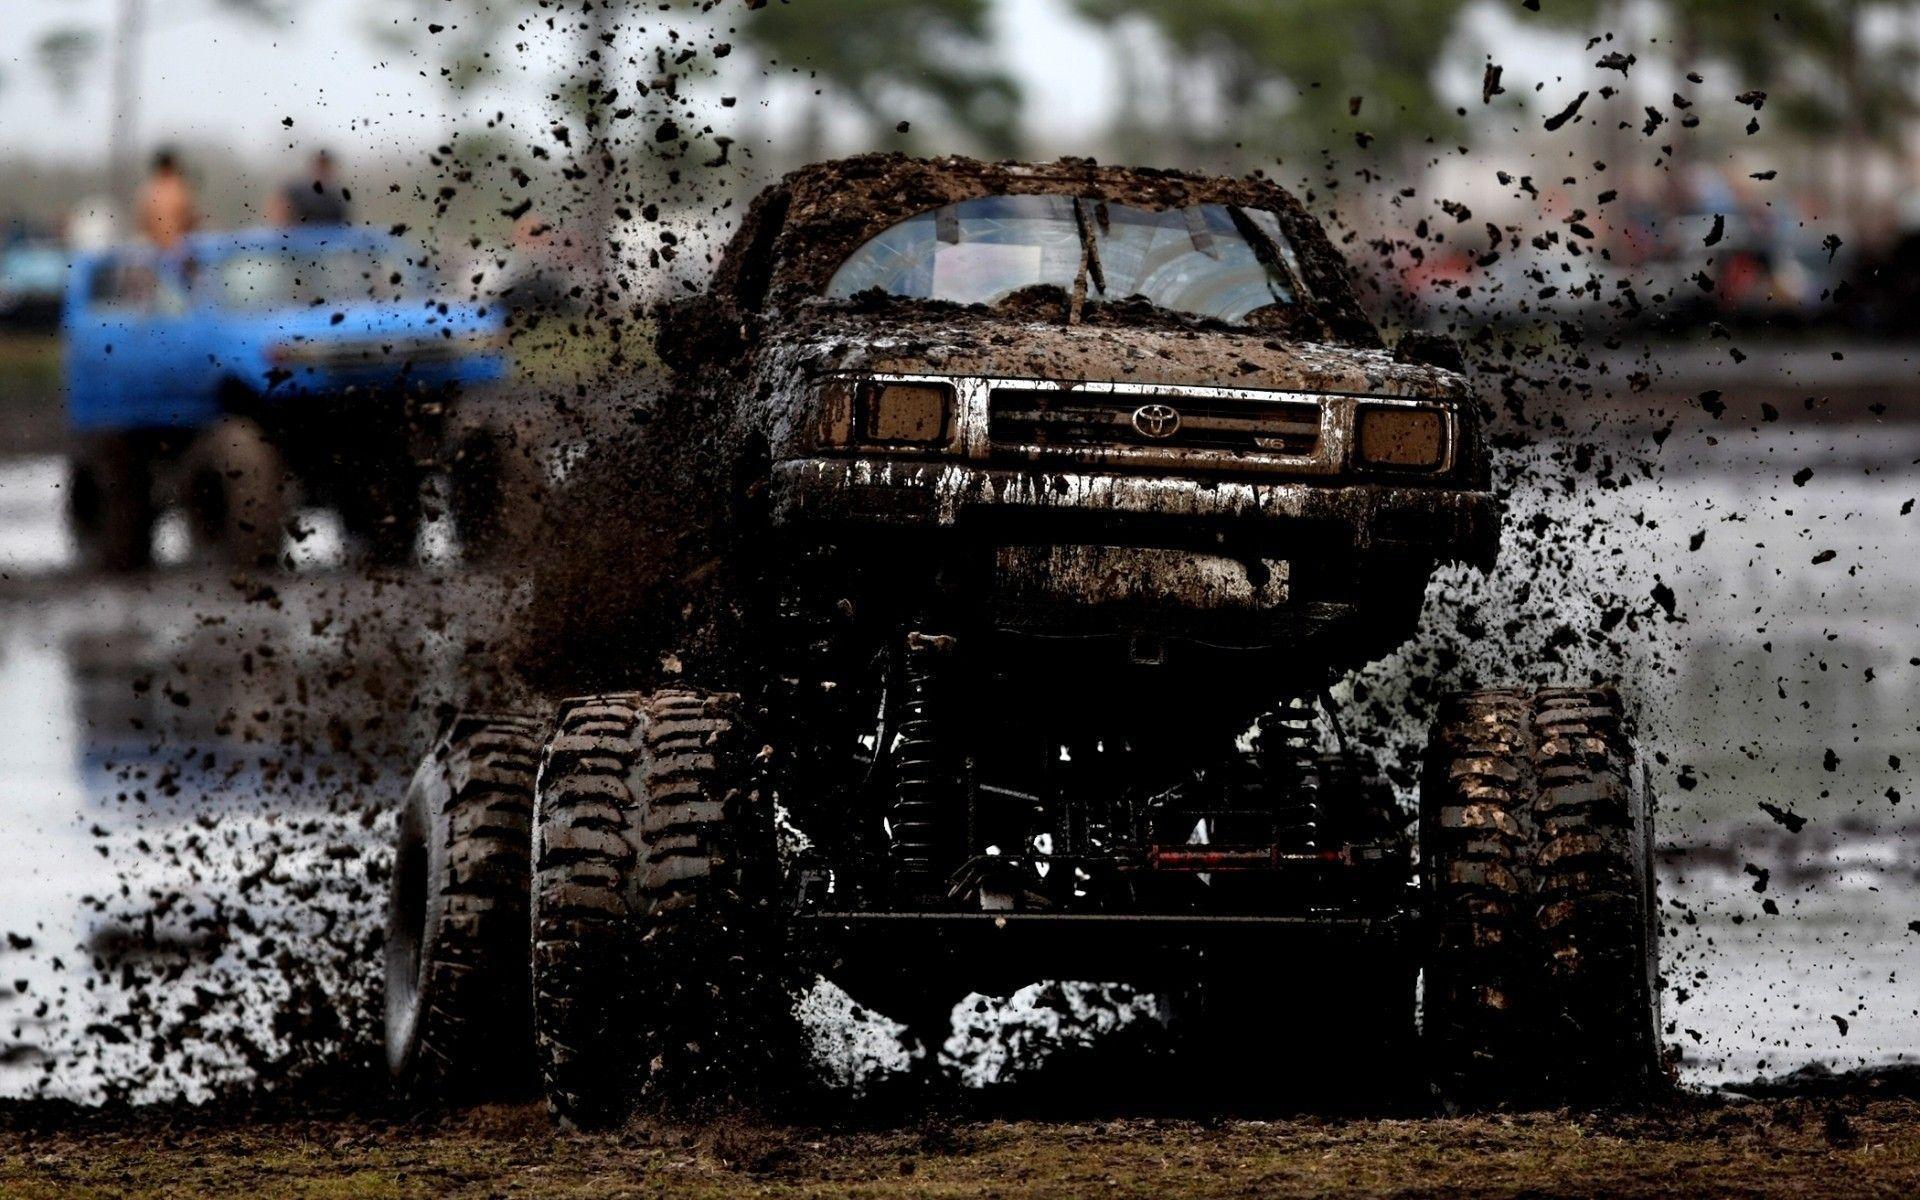 Toyota SUV covered in mud wallpapers and Wallpaper